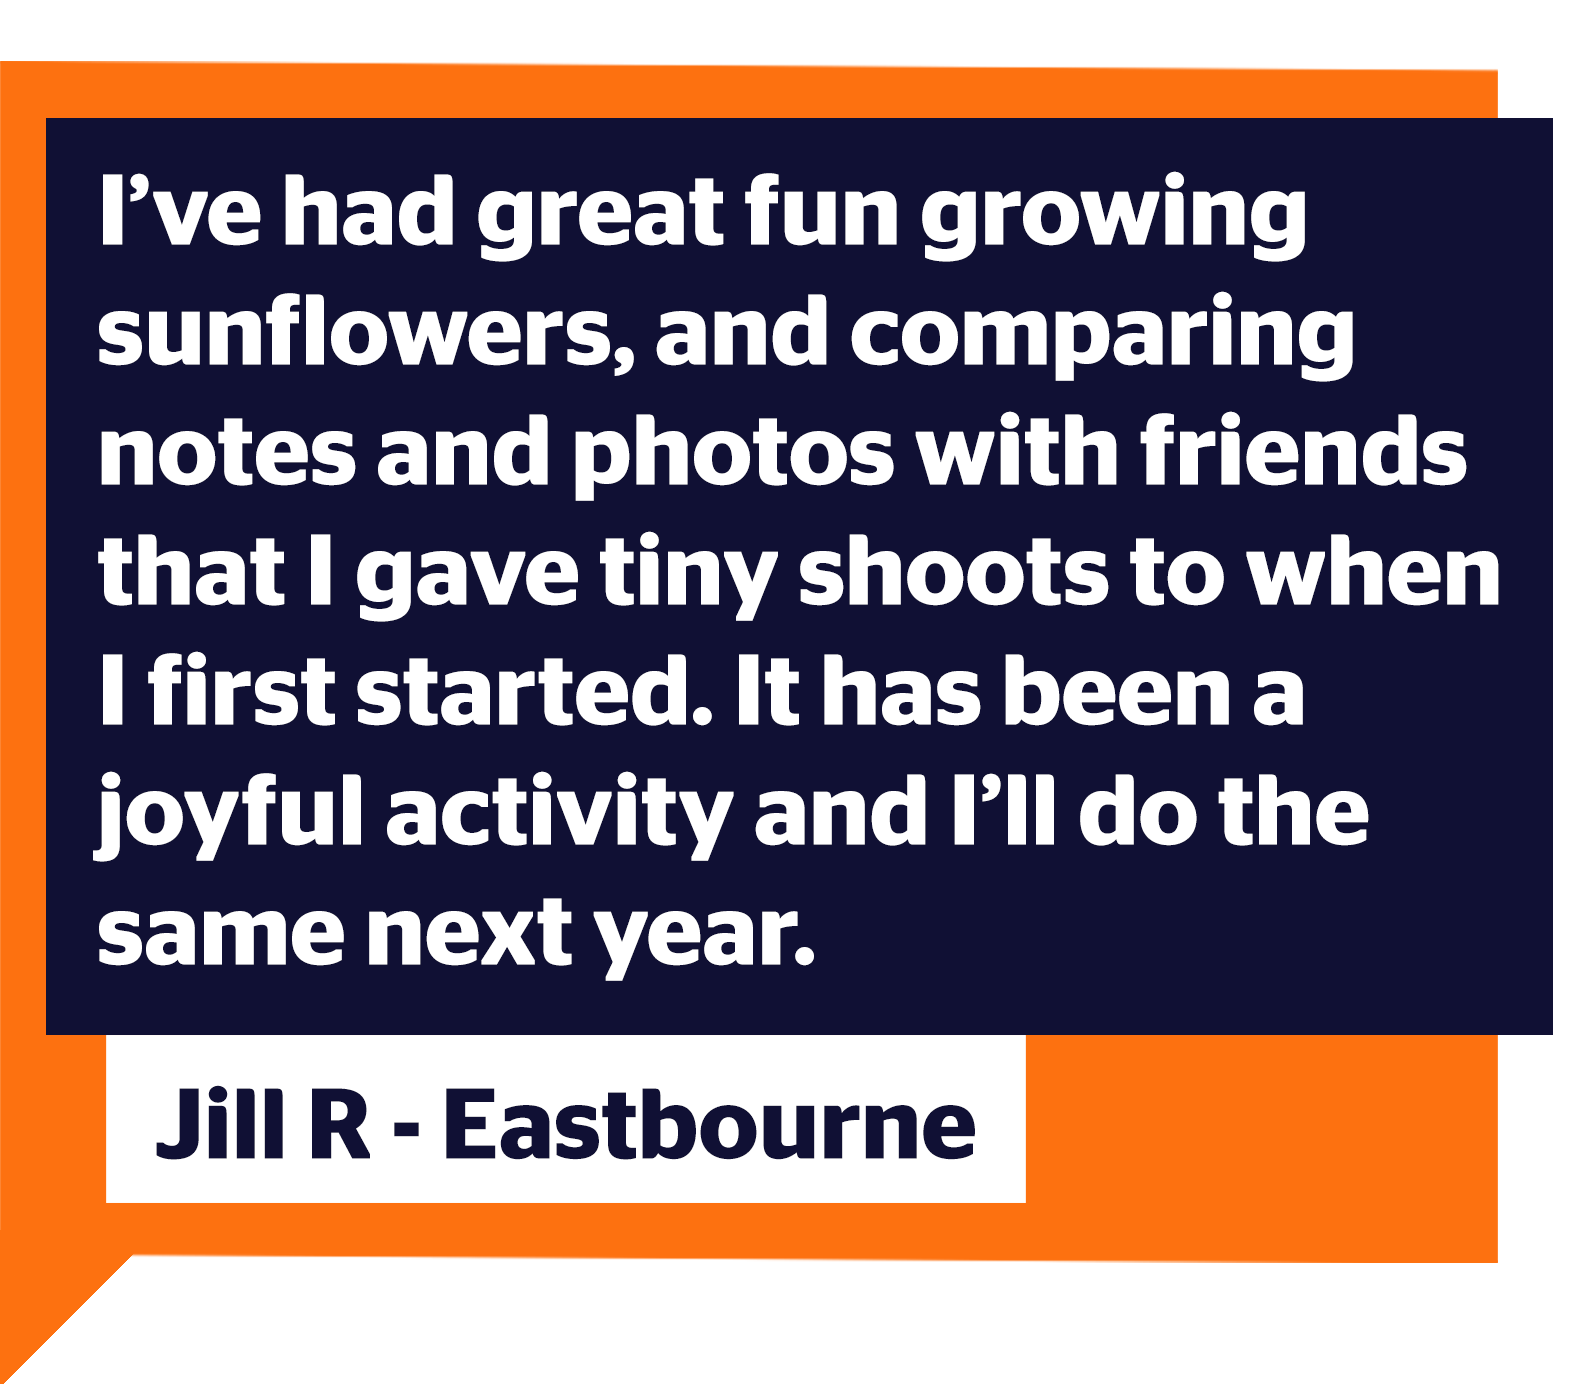 I've had great fun growing sunflowers and comparing notes and photos with friends that I gave tiny shoots to when I first started. It has been a joyful activity and I'll do the same next year. Jill R, Eastbourne